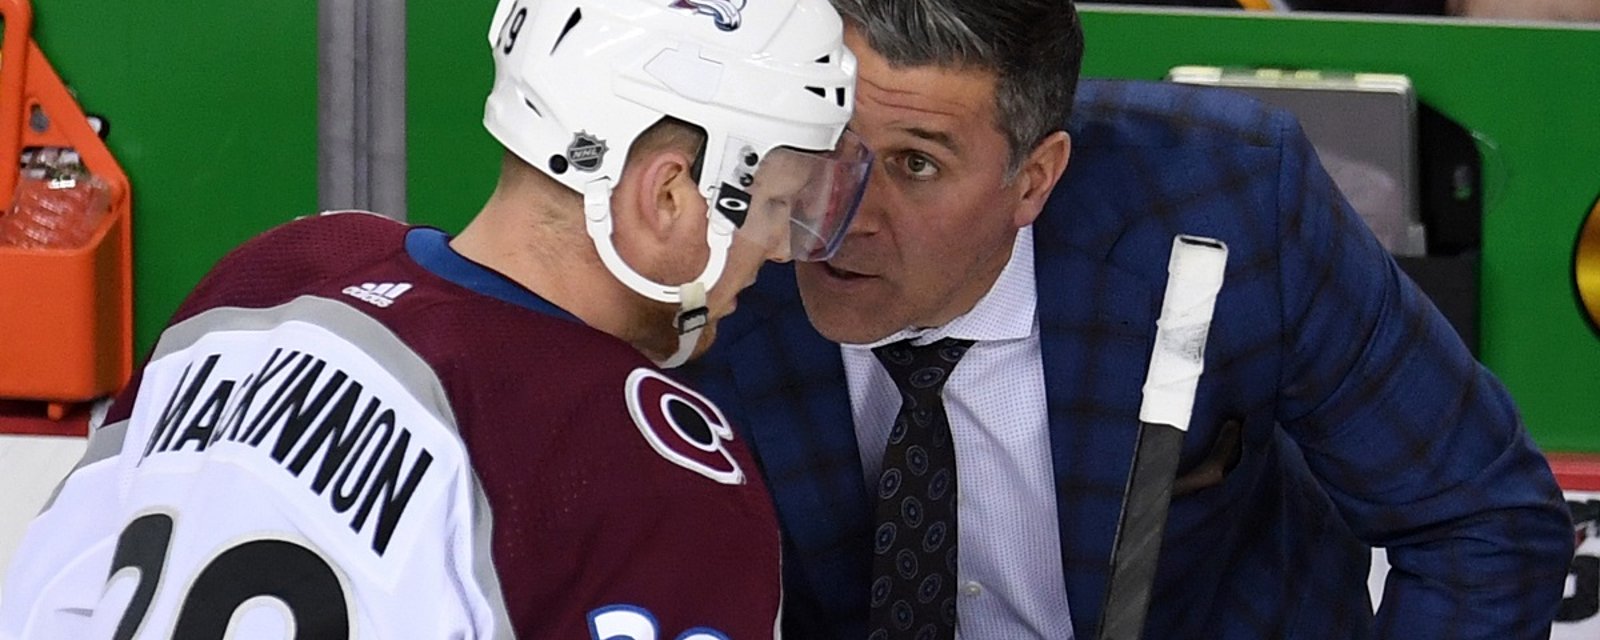 Bednar: “We're going to be coming home and f*cking golfing.”